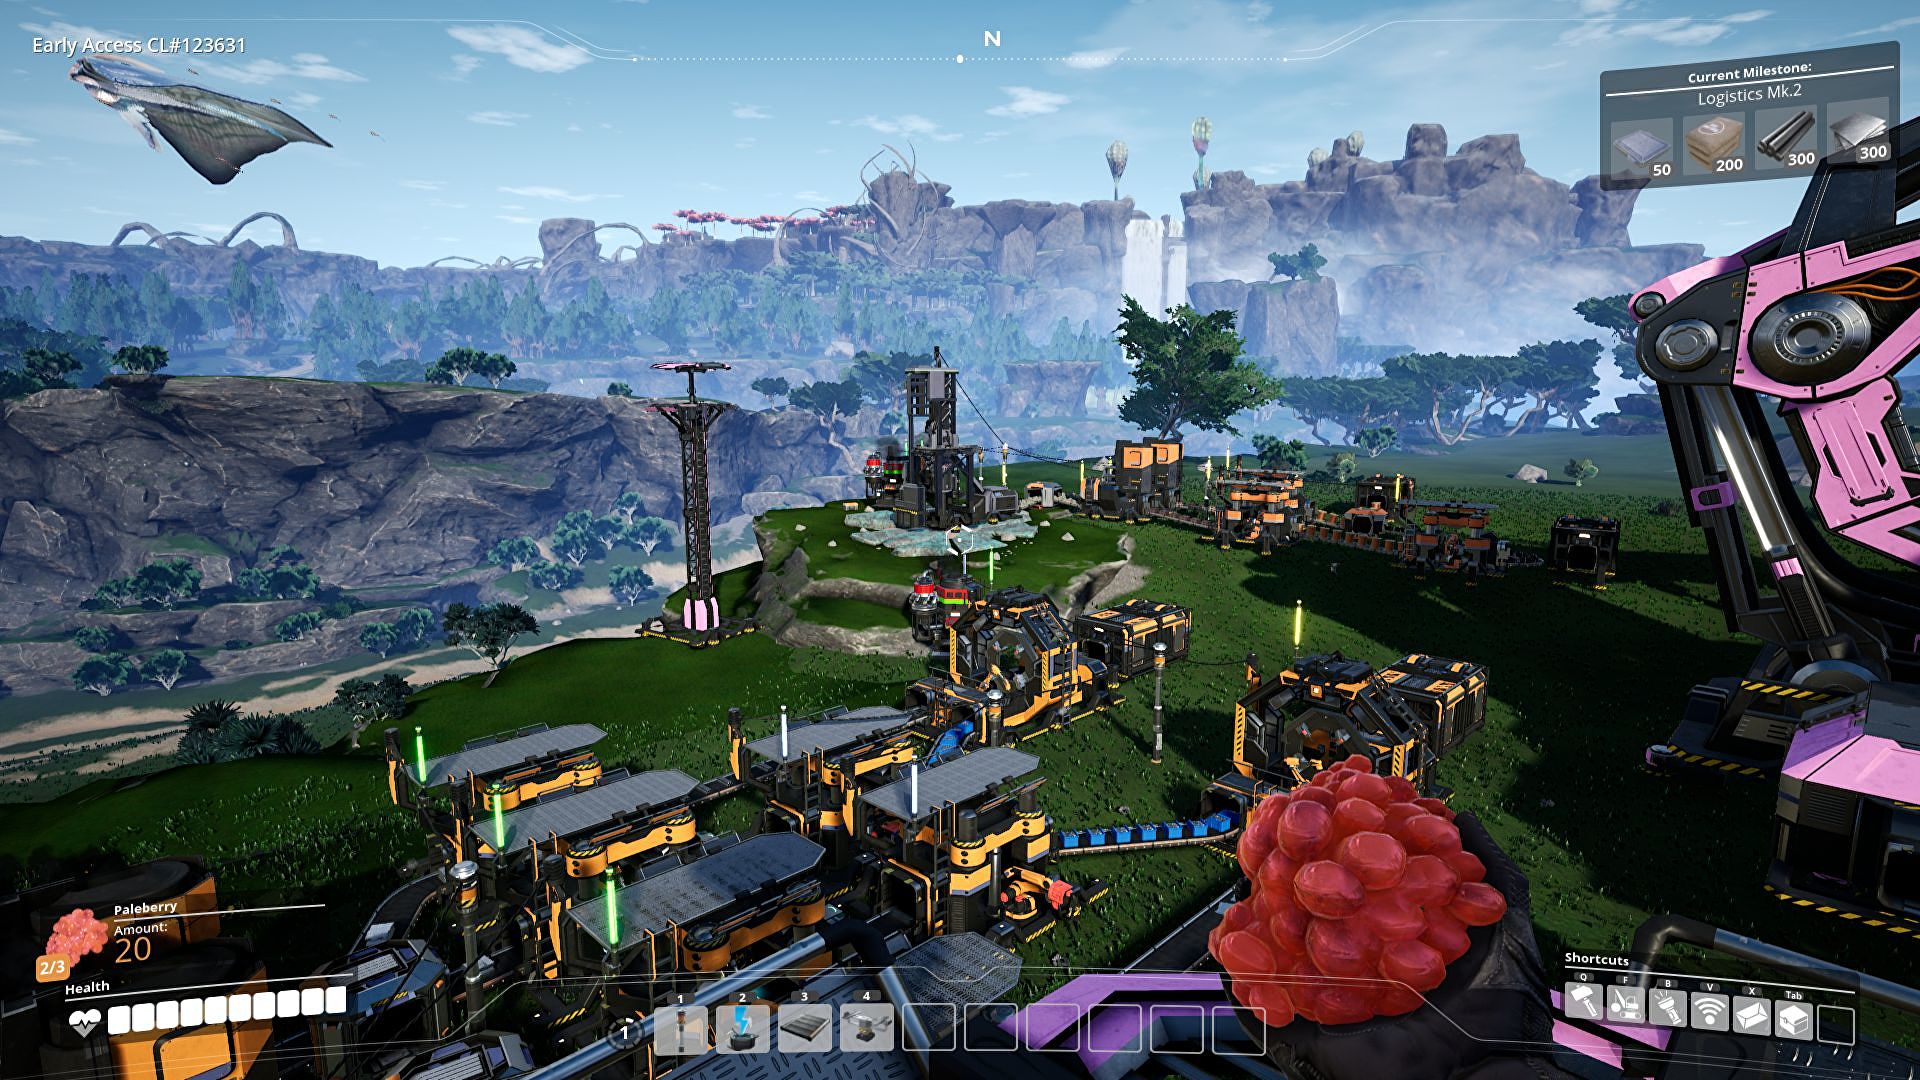 SATISFACTORY Crack V0.4.1.0 With Torrent Free Download-EARLY ACCESS